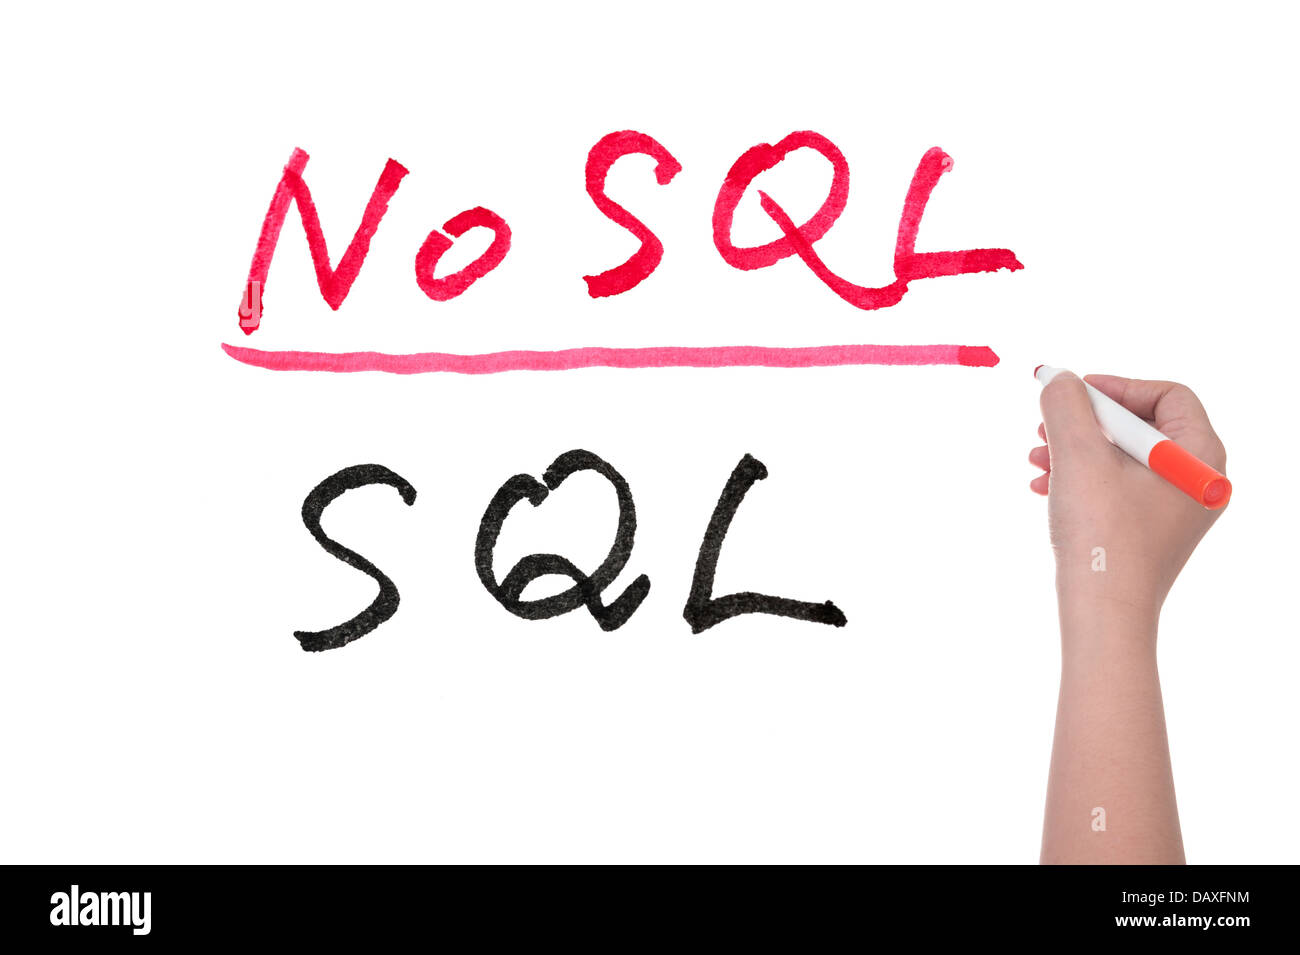 SQL or NoSQL words written on white board, Big data concept Stock Photo